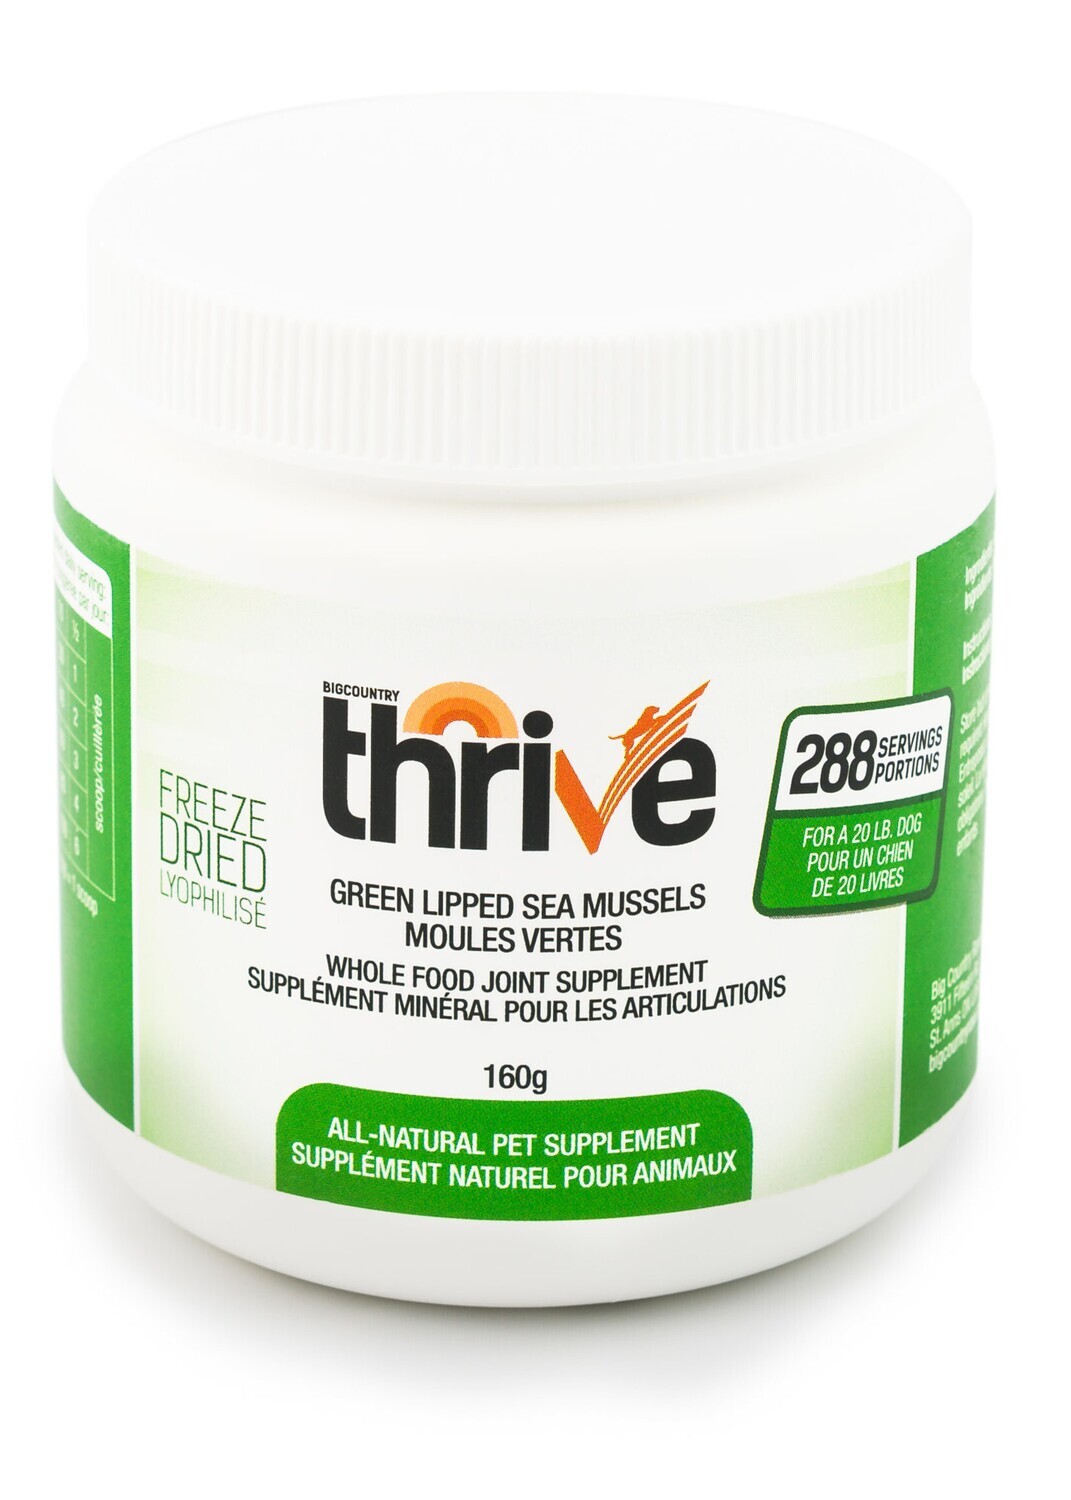 Thrive Green Lipped Mussels - 160g